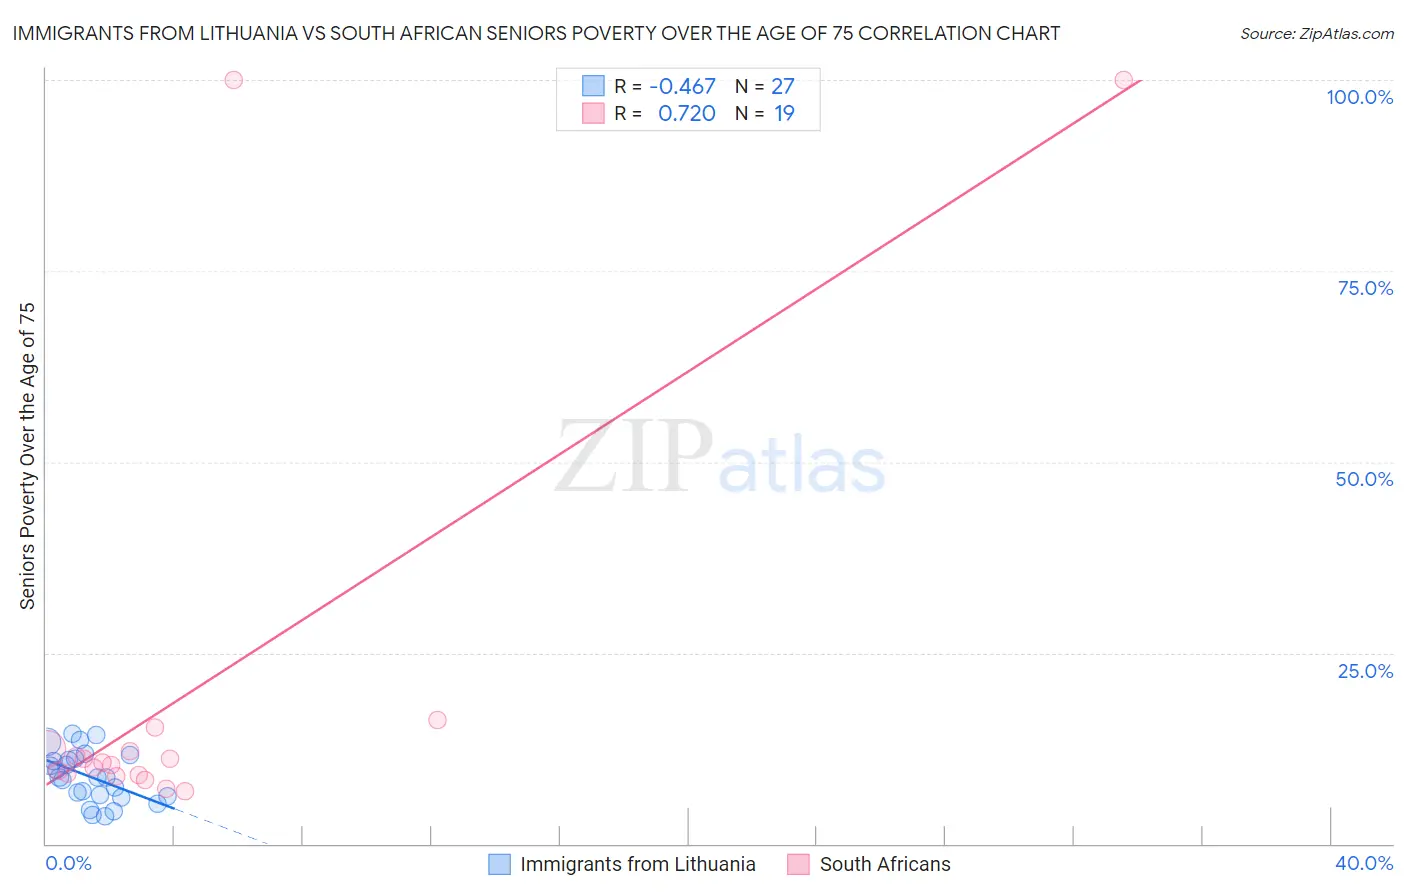 Immigrants from Lithuania vs South African Seniors Poverty Over the Age of 75